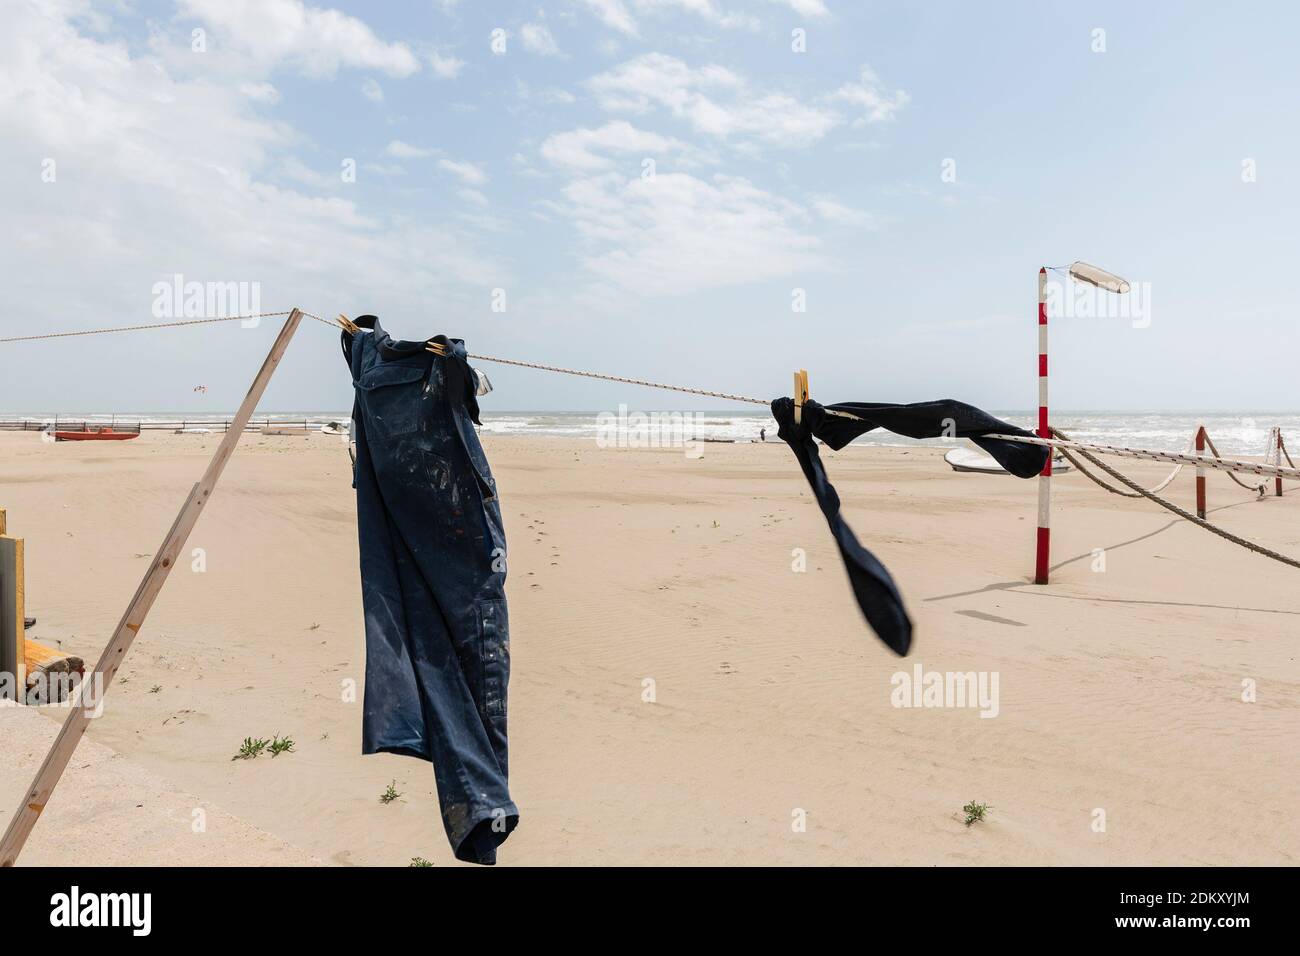 Clothes Drying On Clothesline At Beach Against Sky Stock Photo